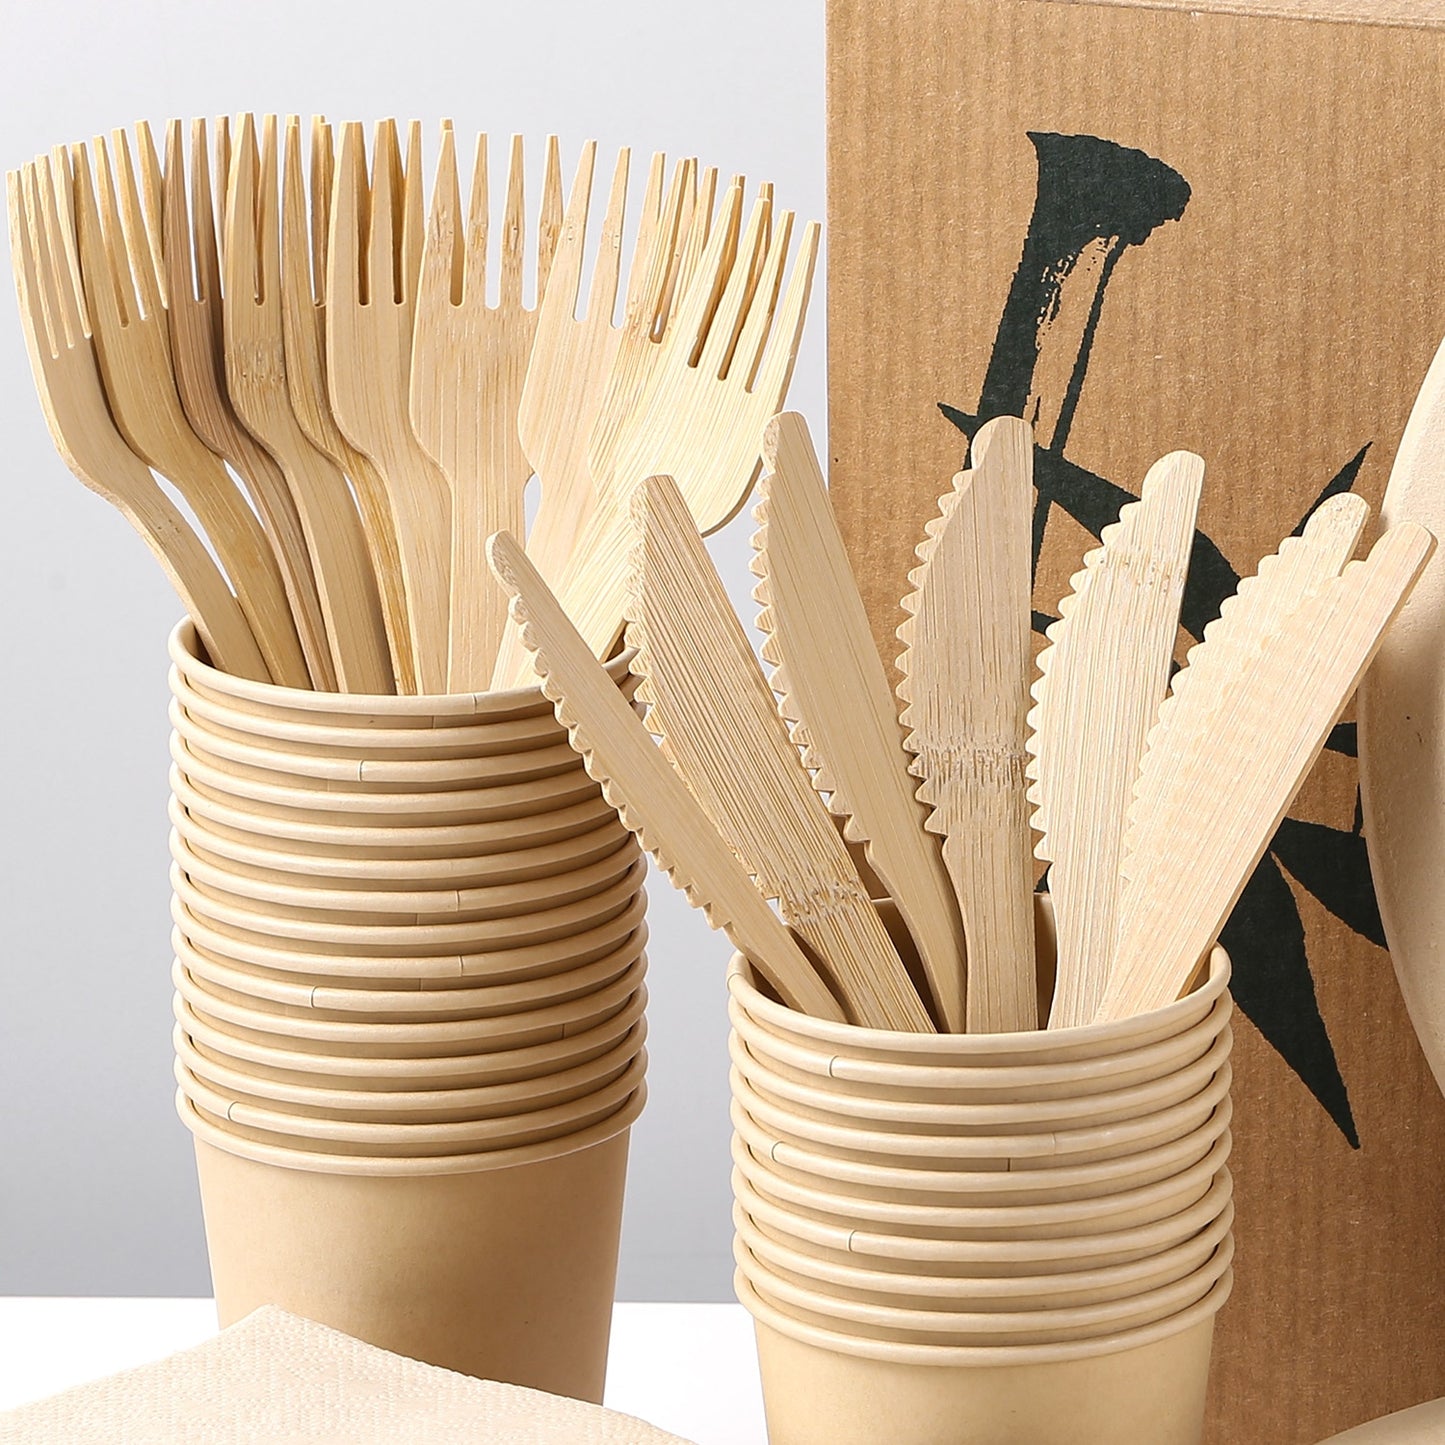 Disposable Tableware Set - Plastic-Free Bamboo Cutlery, Plates and Napkins. Eco-friendly disposable cutlery. 